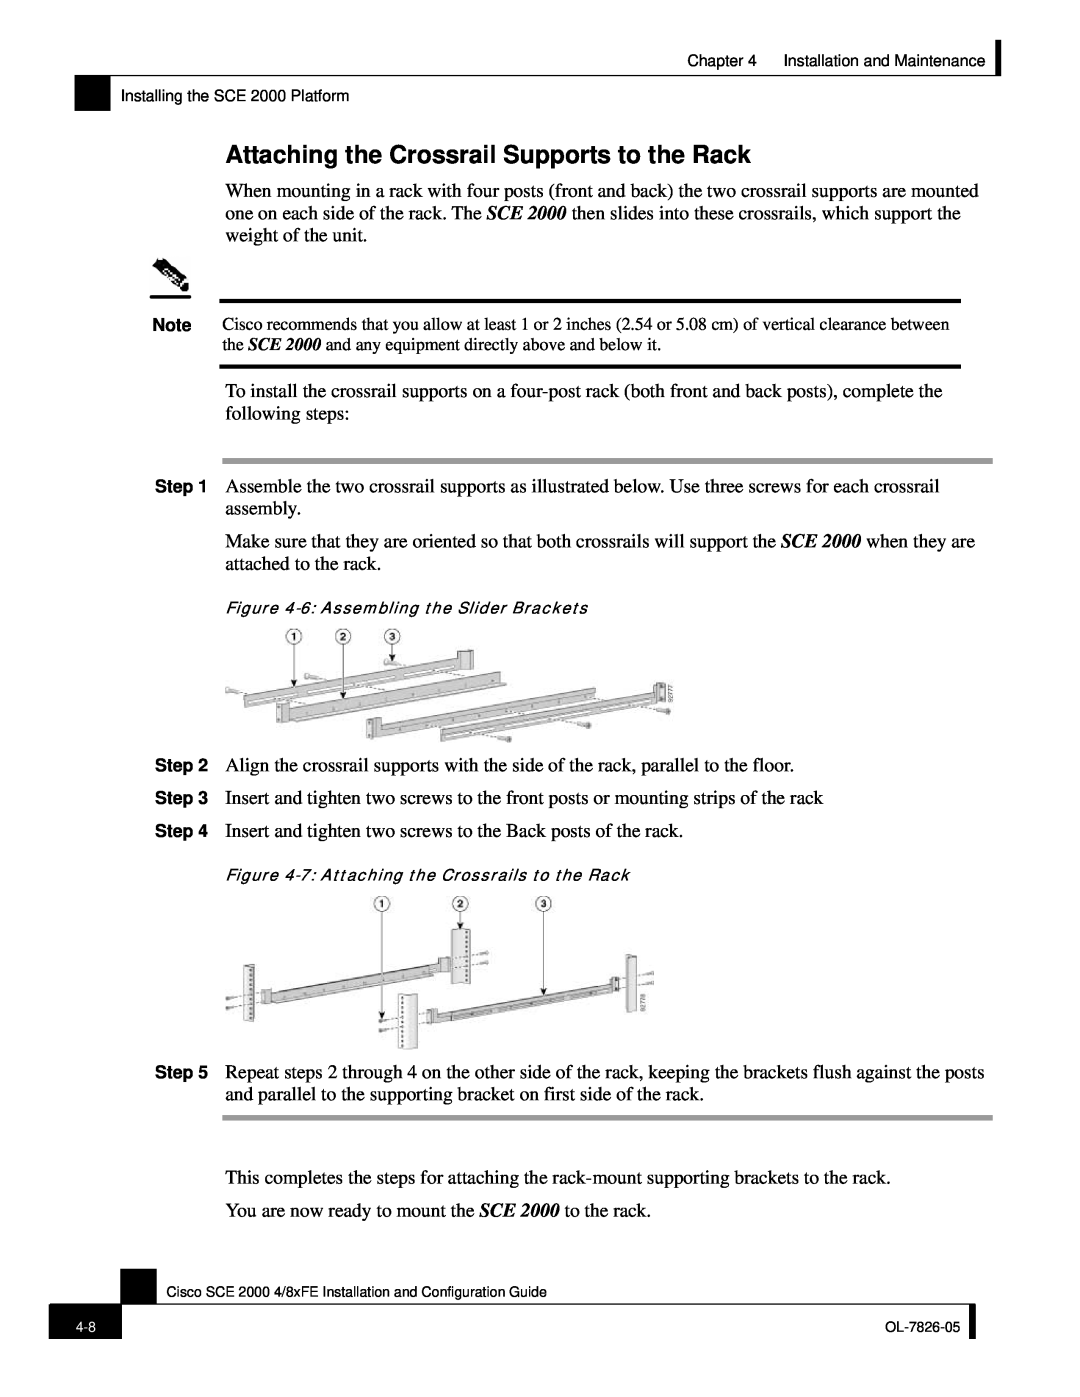 Cisco Systems SCE 2000 4/8xFE manual Attaching the Crossrail Supports to the Rack 